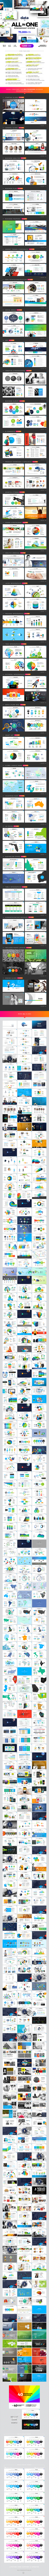 Data | Powerpoint Infographic System